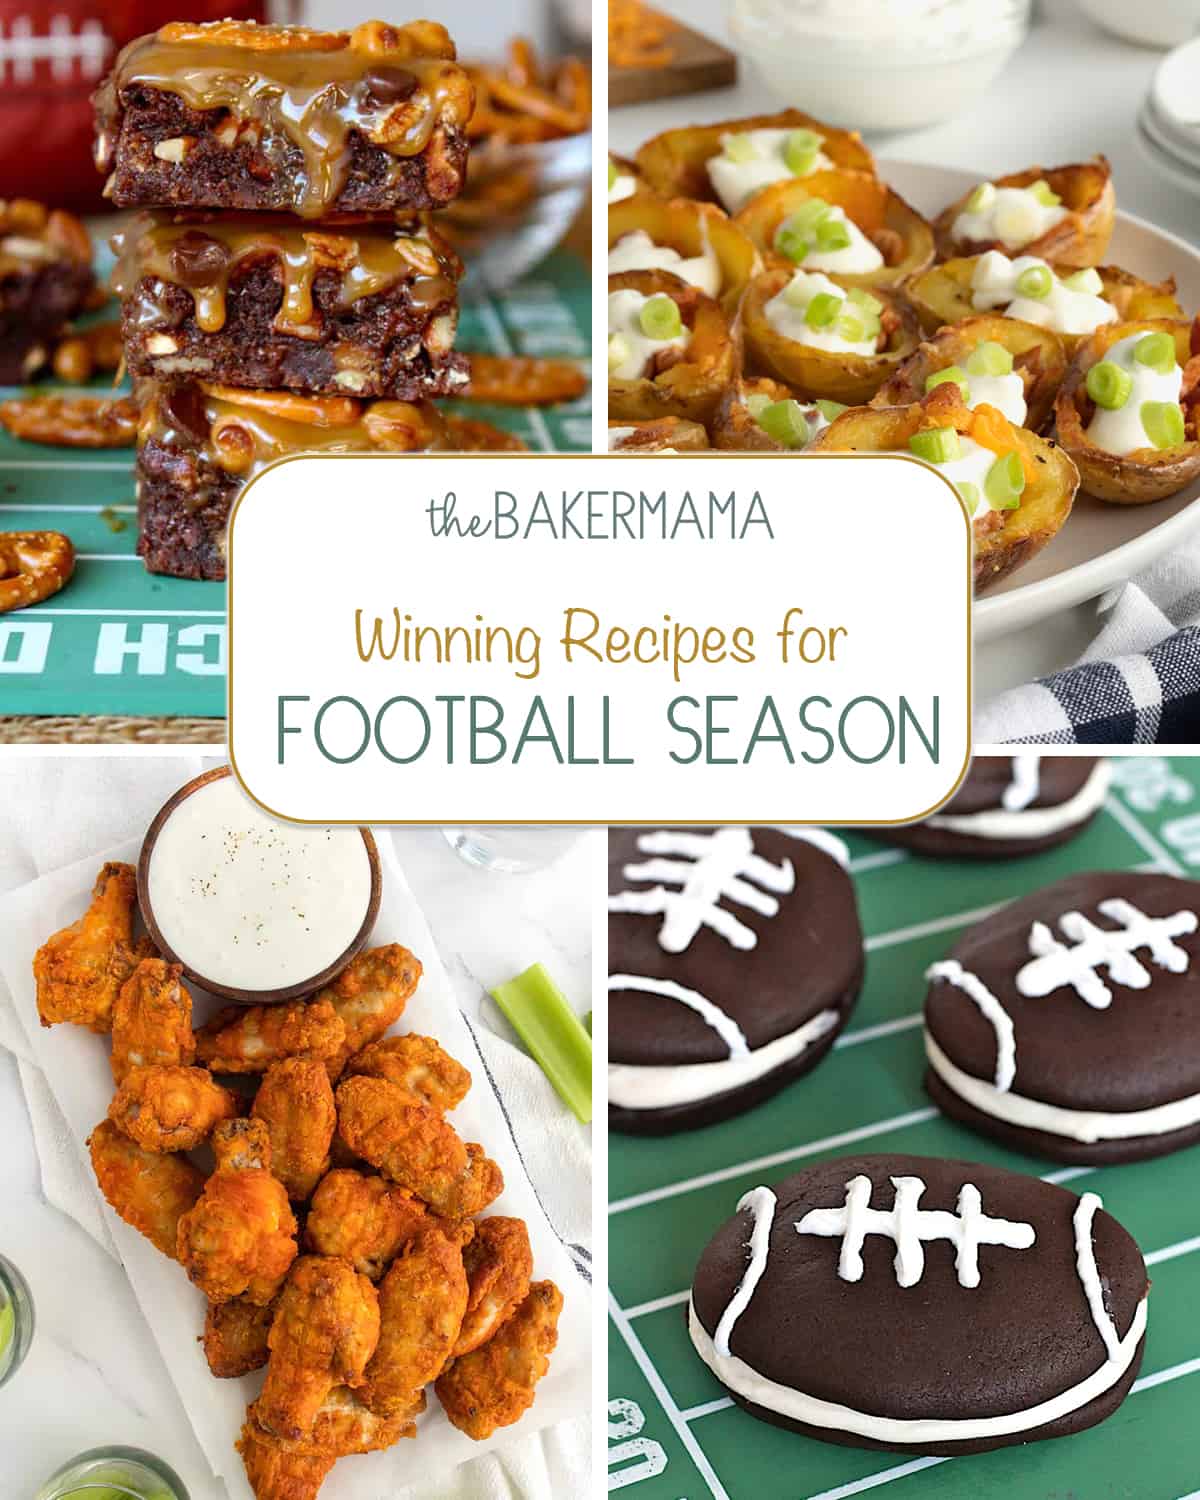 Touchdown brownies, mini potato skins, baked chicken wings and football whoopee pies.